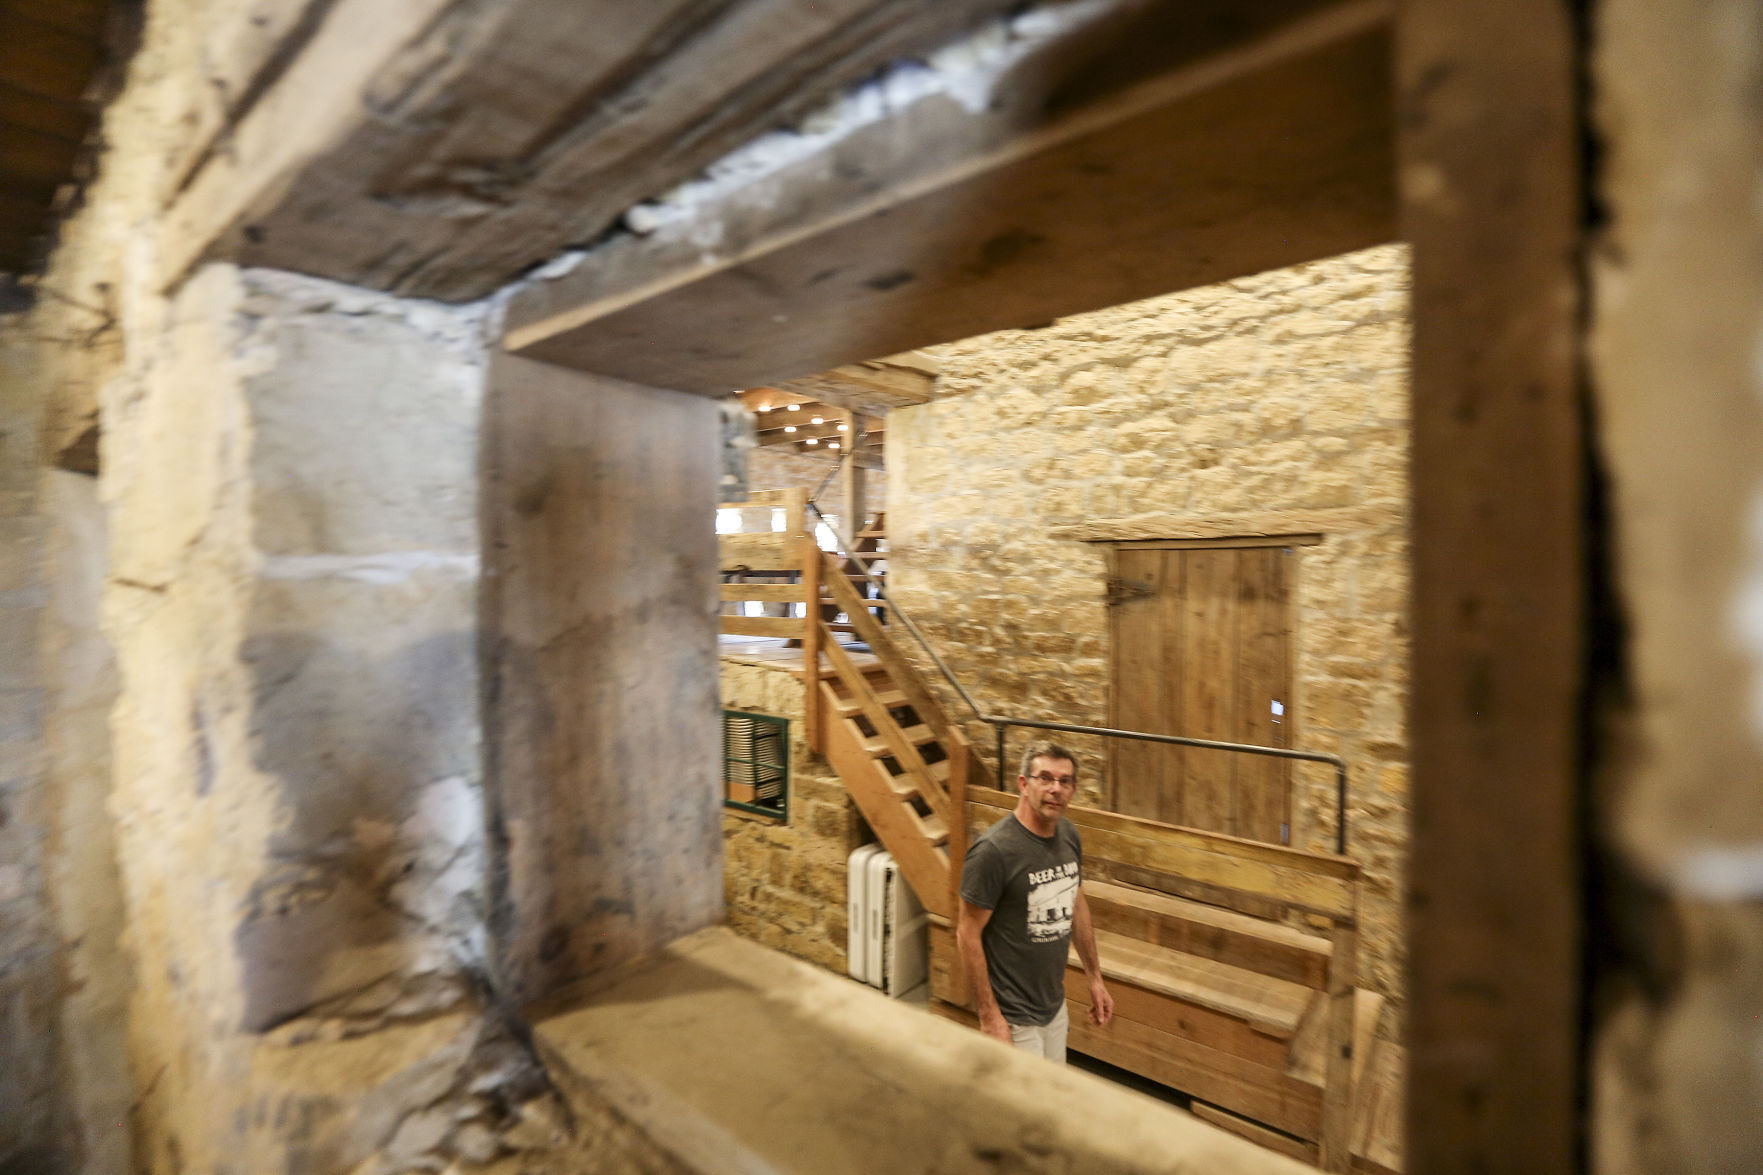 Don Vize, co-owner of the Gehlen House Inn and Barn, walks through the historic barn located in St. Donatus, Iowa, on Sunday, May 3, 2021. PHOTO CREDIT: Dave Kettering